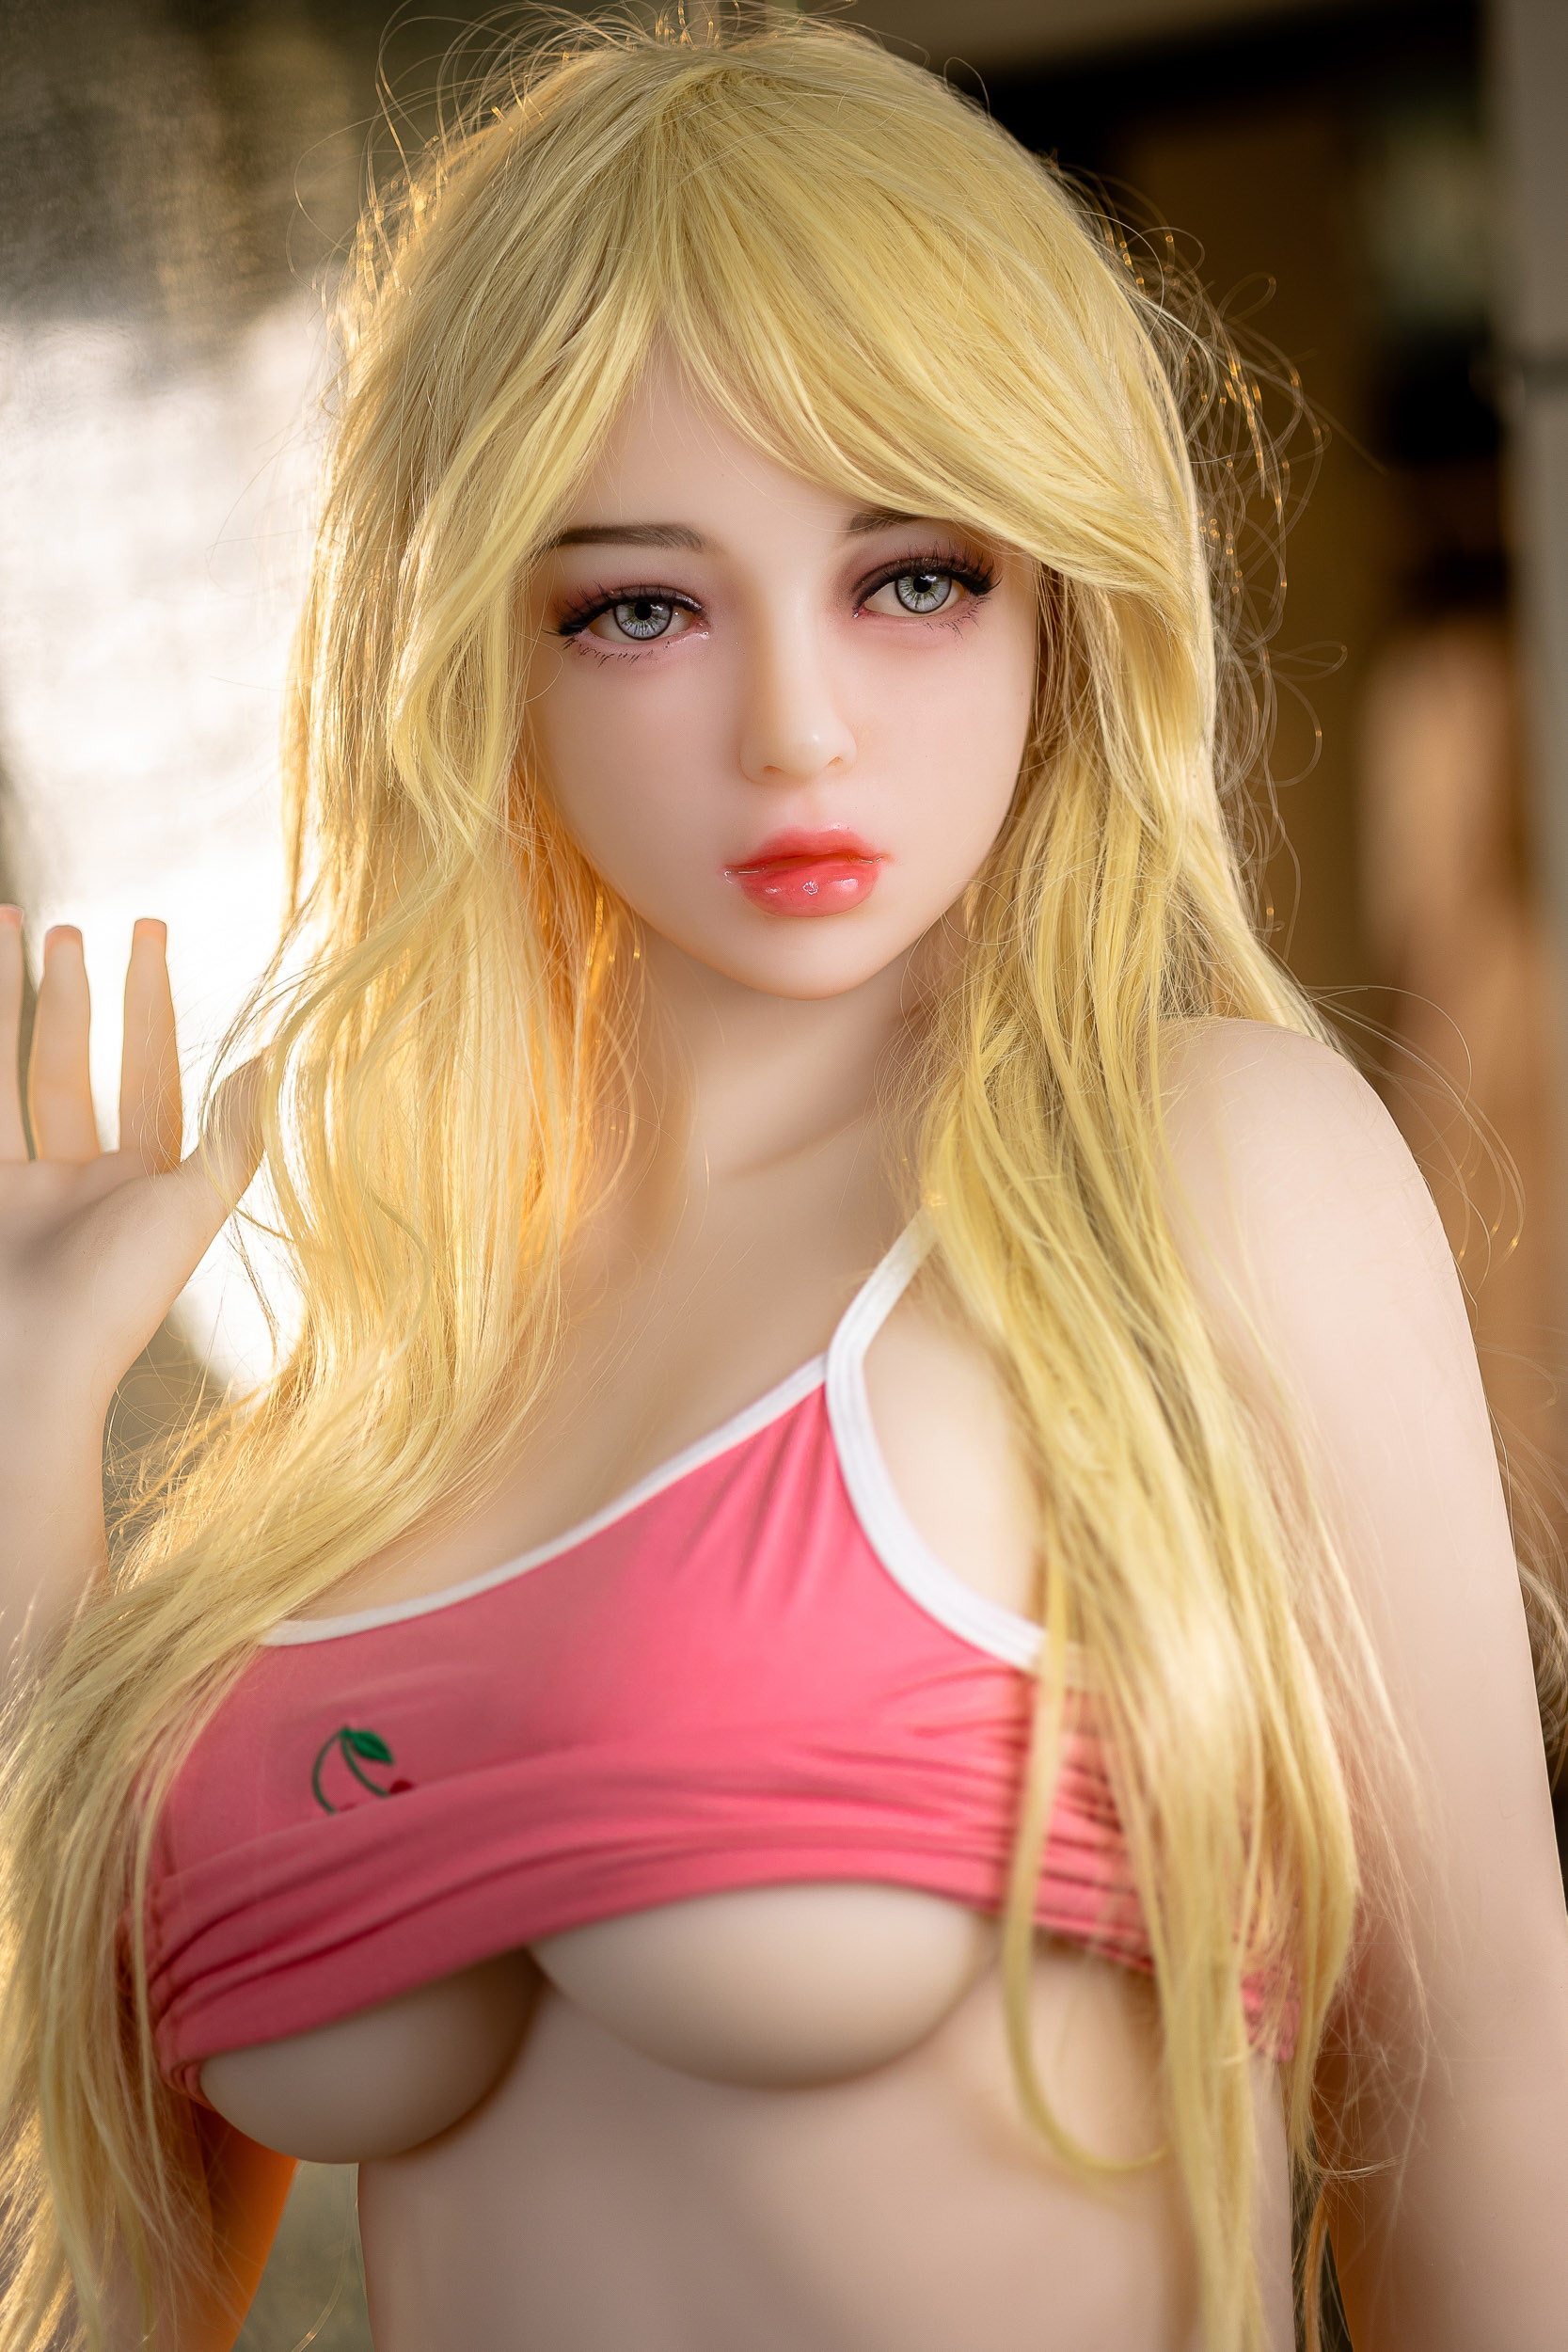 5ft2/158cm Medium Breast Sex Doll with Blonde Hair - Angie-SexDollBabe